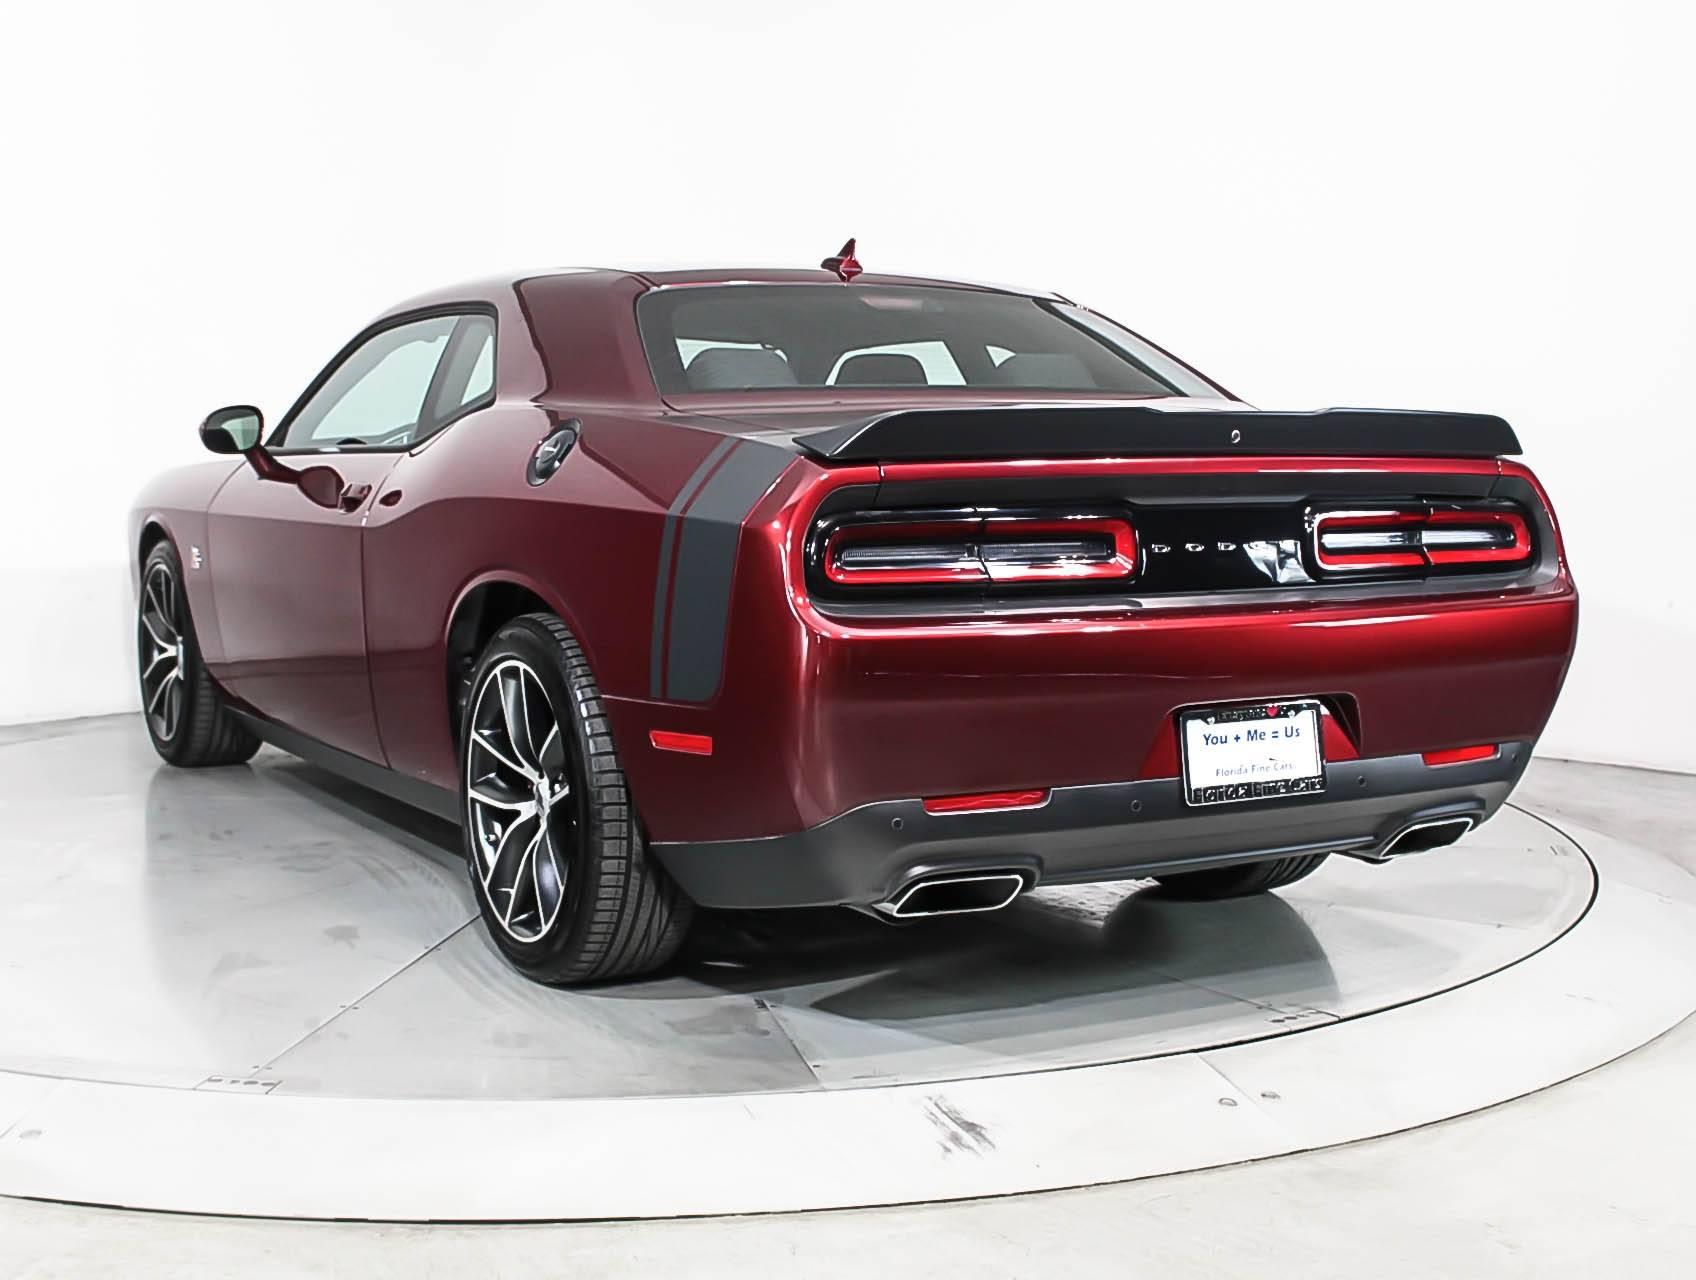 Florida Fine Cars - Used DODGE CHALLENGER 2018 MIAMI SCAT PACK